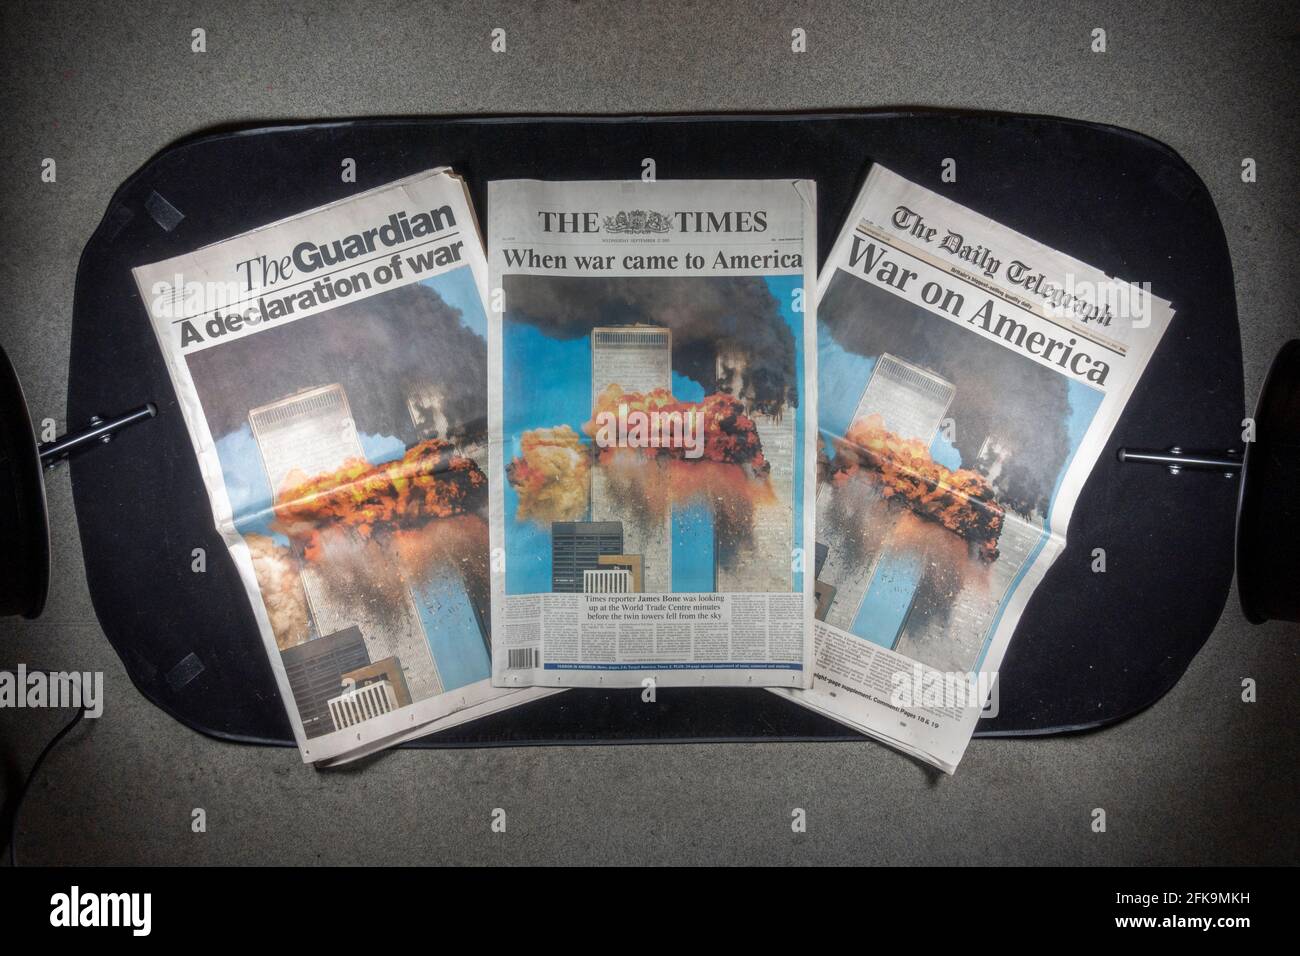 Photography set up of UK newspaper front pages following the terrorist attacks on the United States on 11th September 2001. Stock Photo